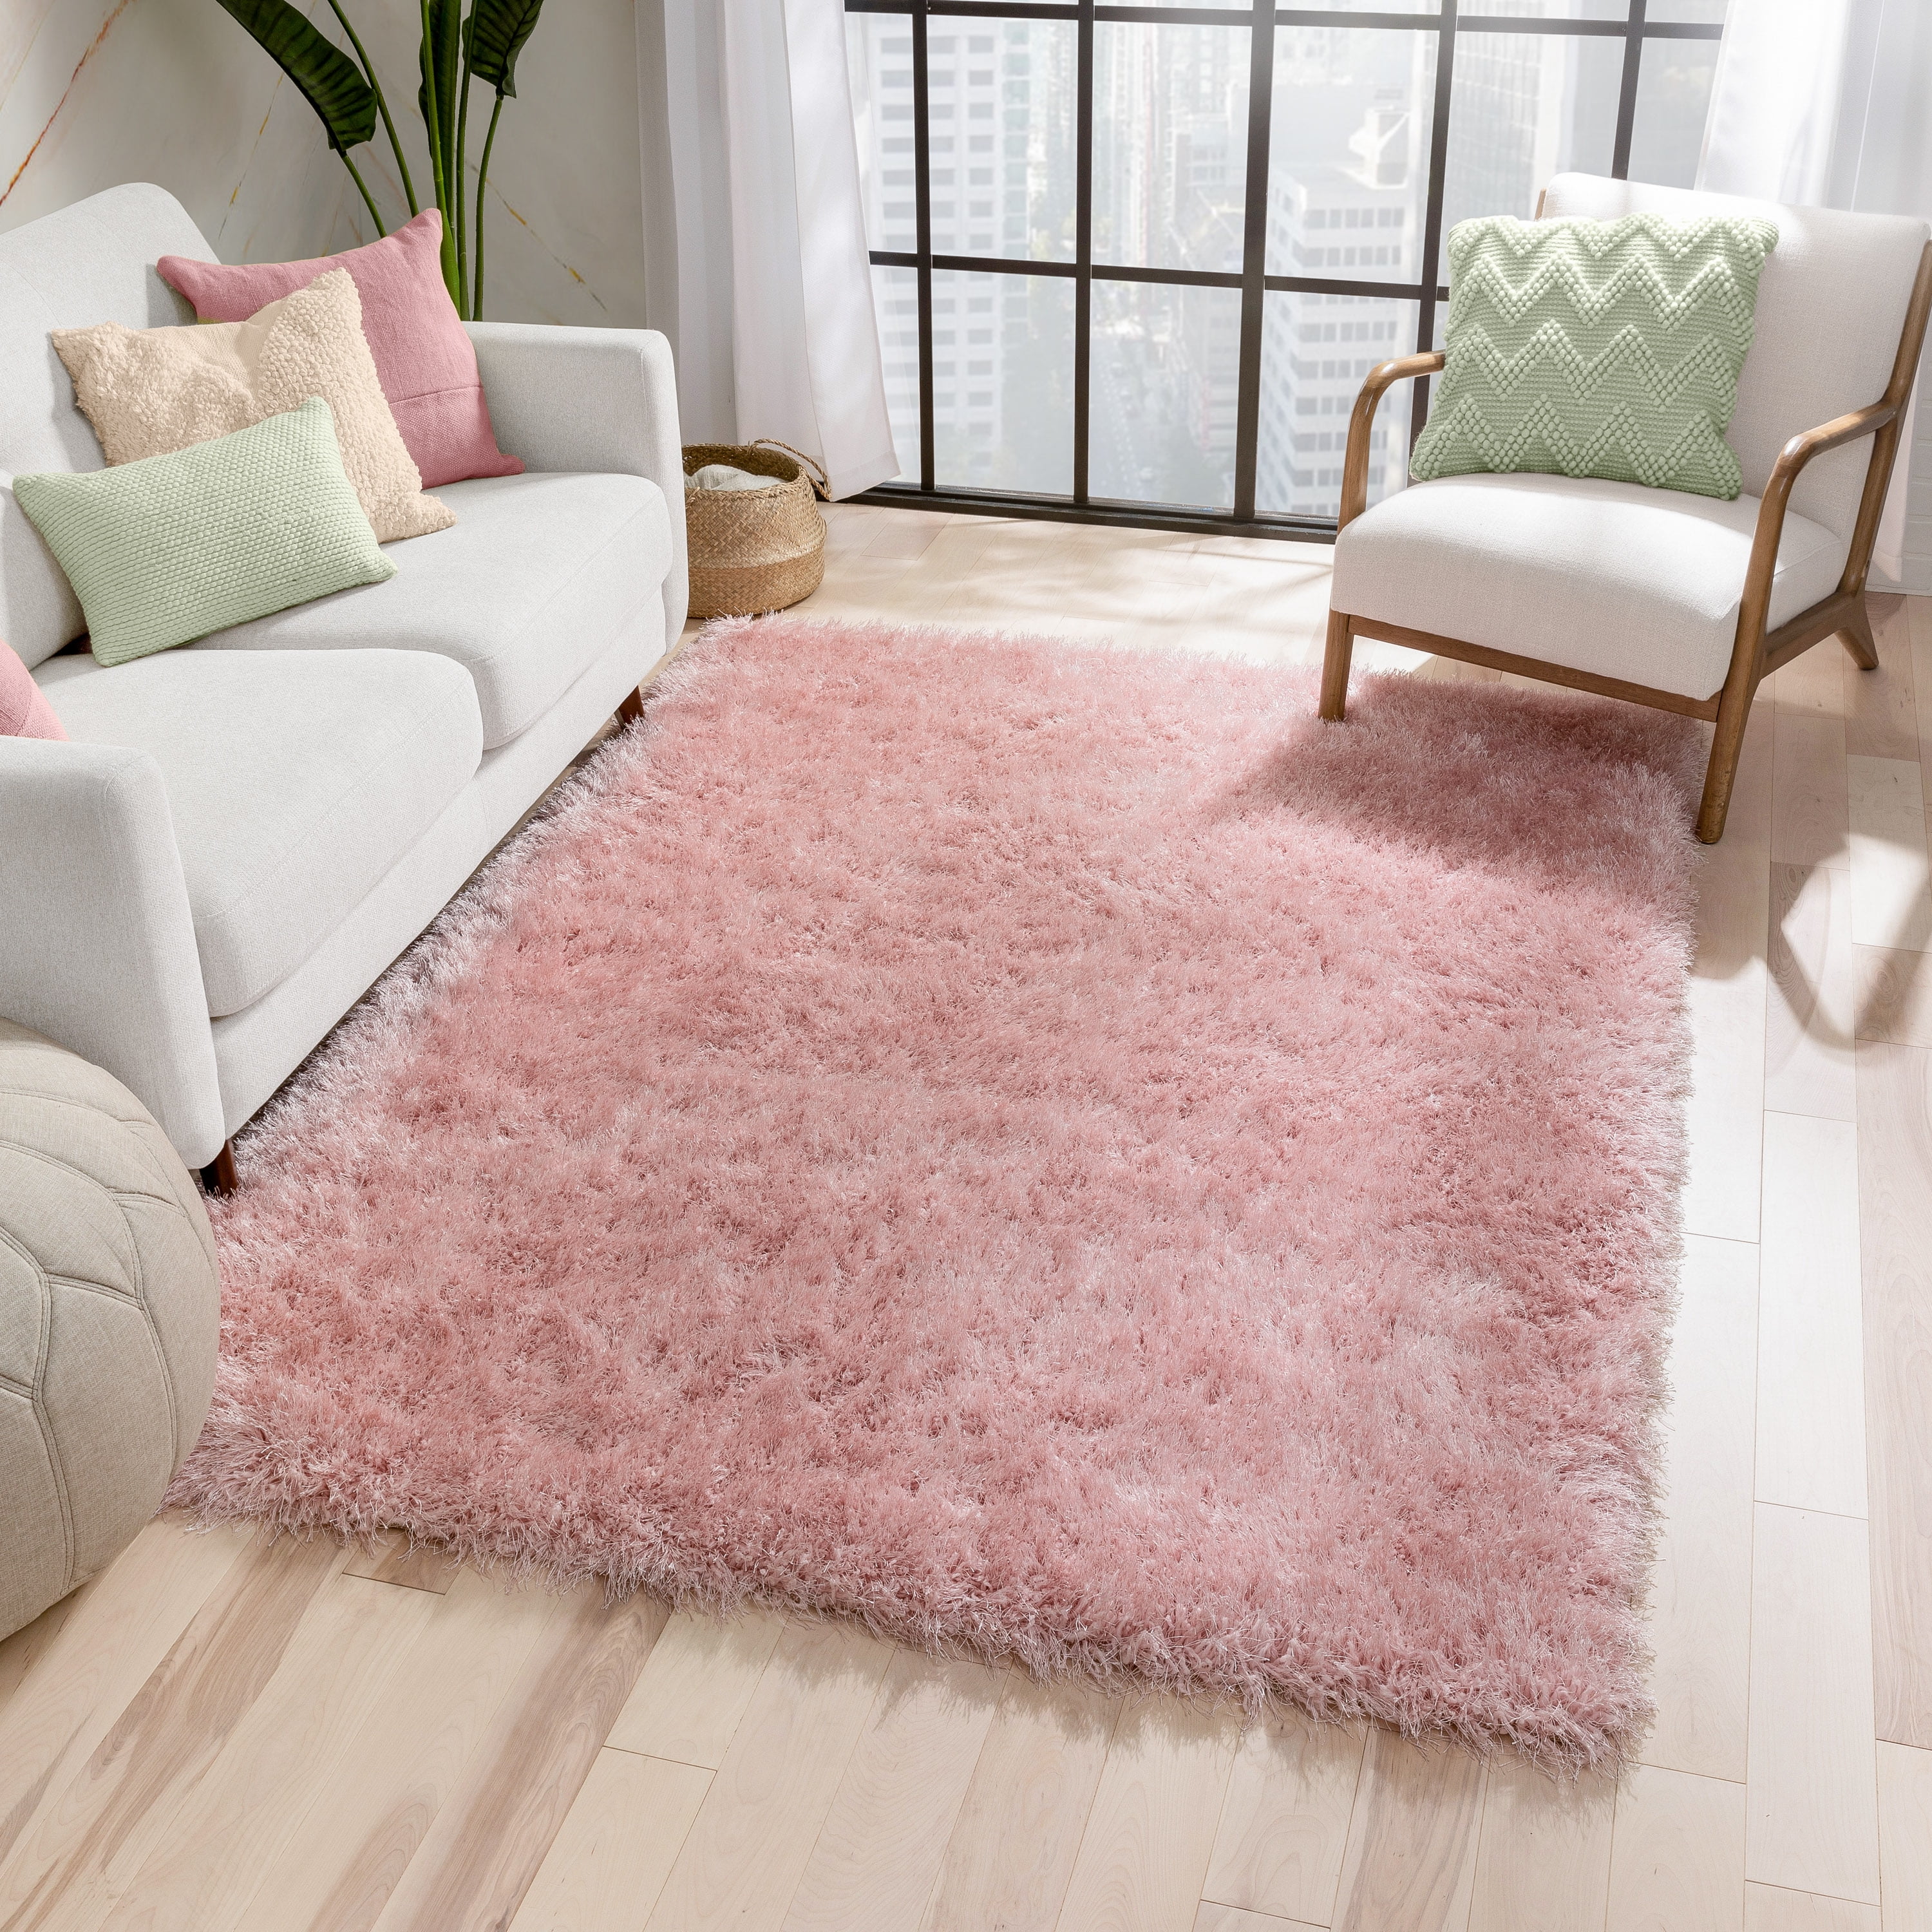 Blush Pink Rugs For Sale Low Pile Pet Friendly Eye Catching Rug for Living Room 